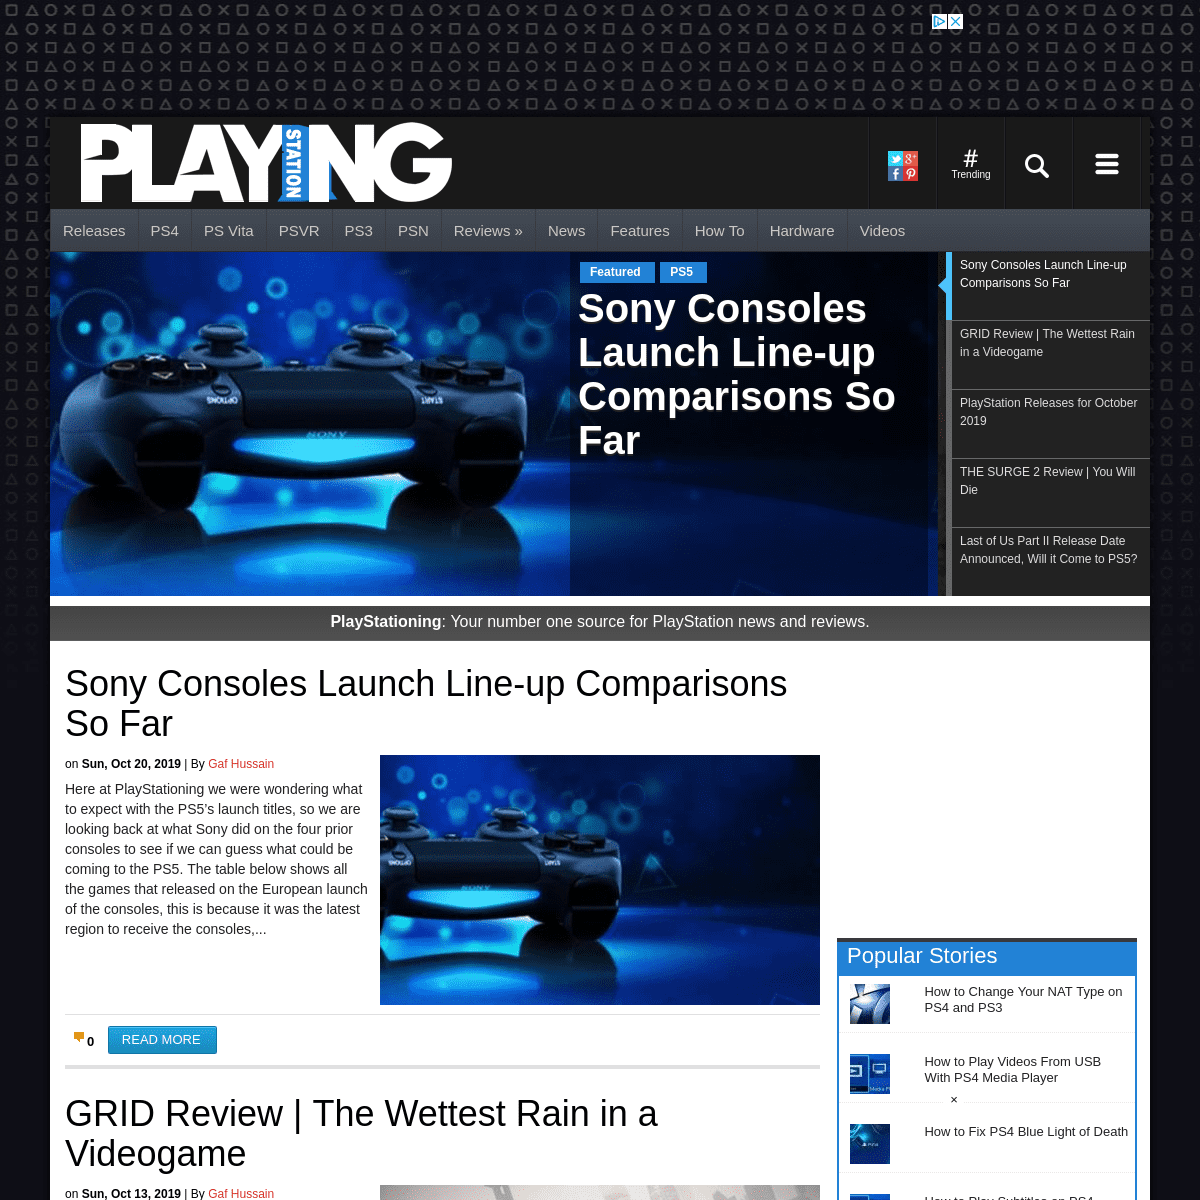 A complete backup of playstationing.com